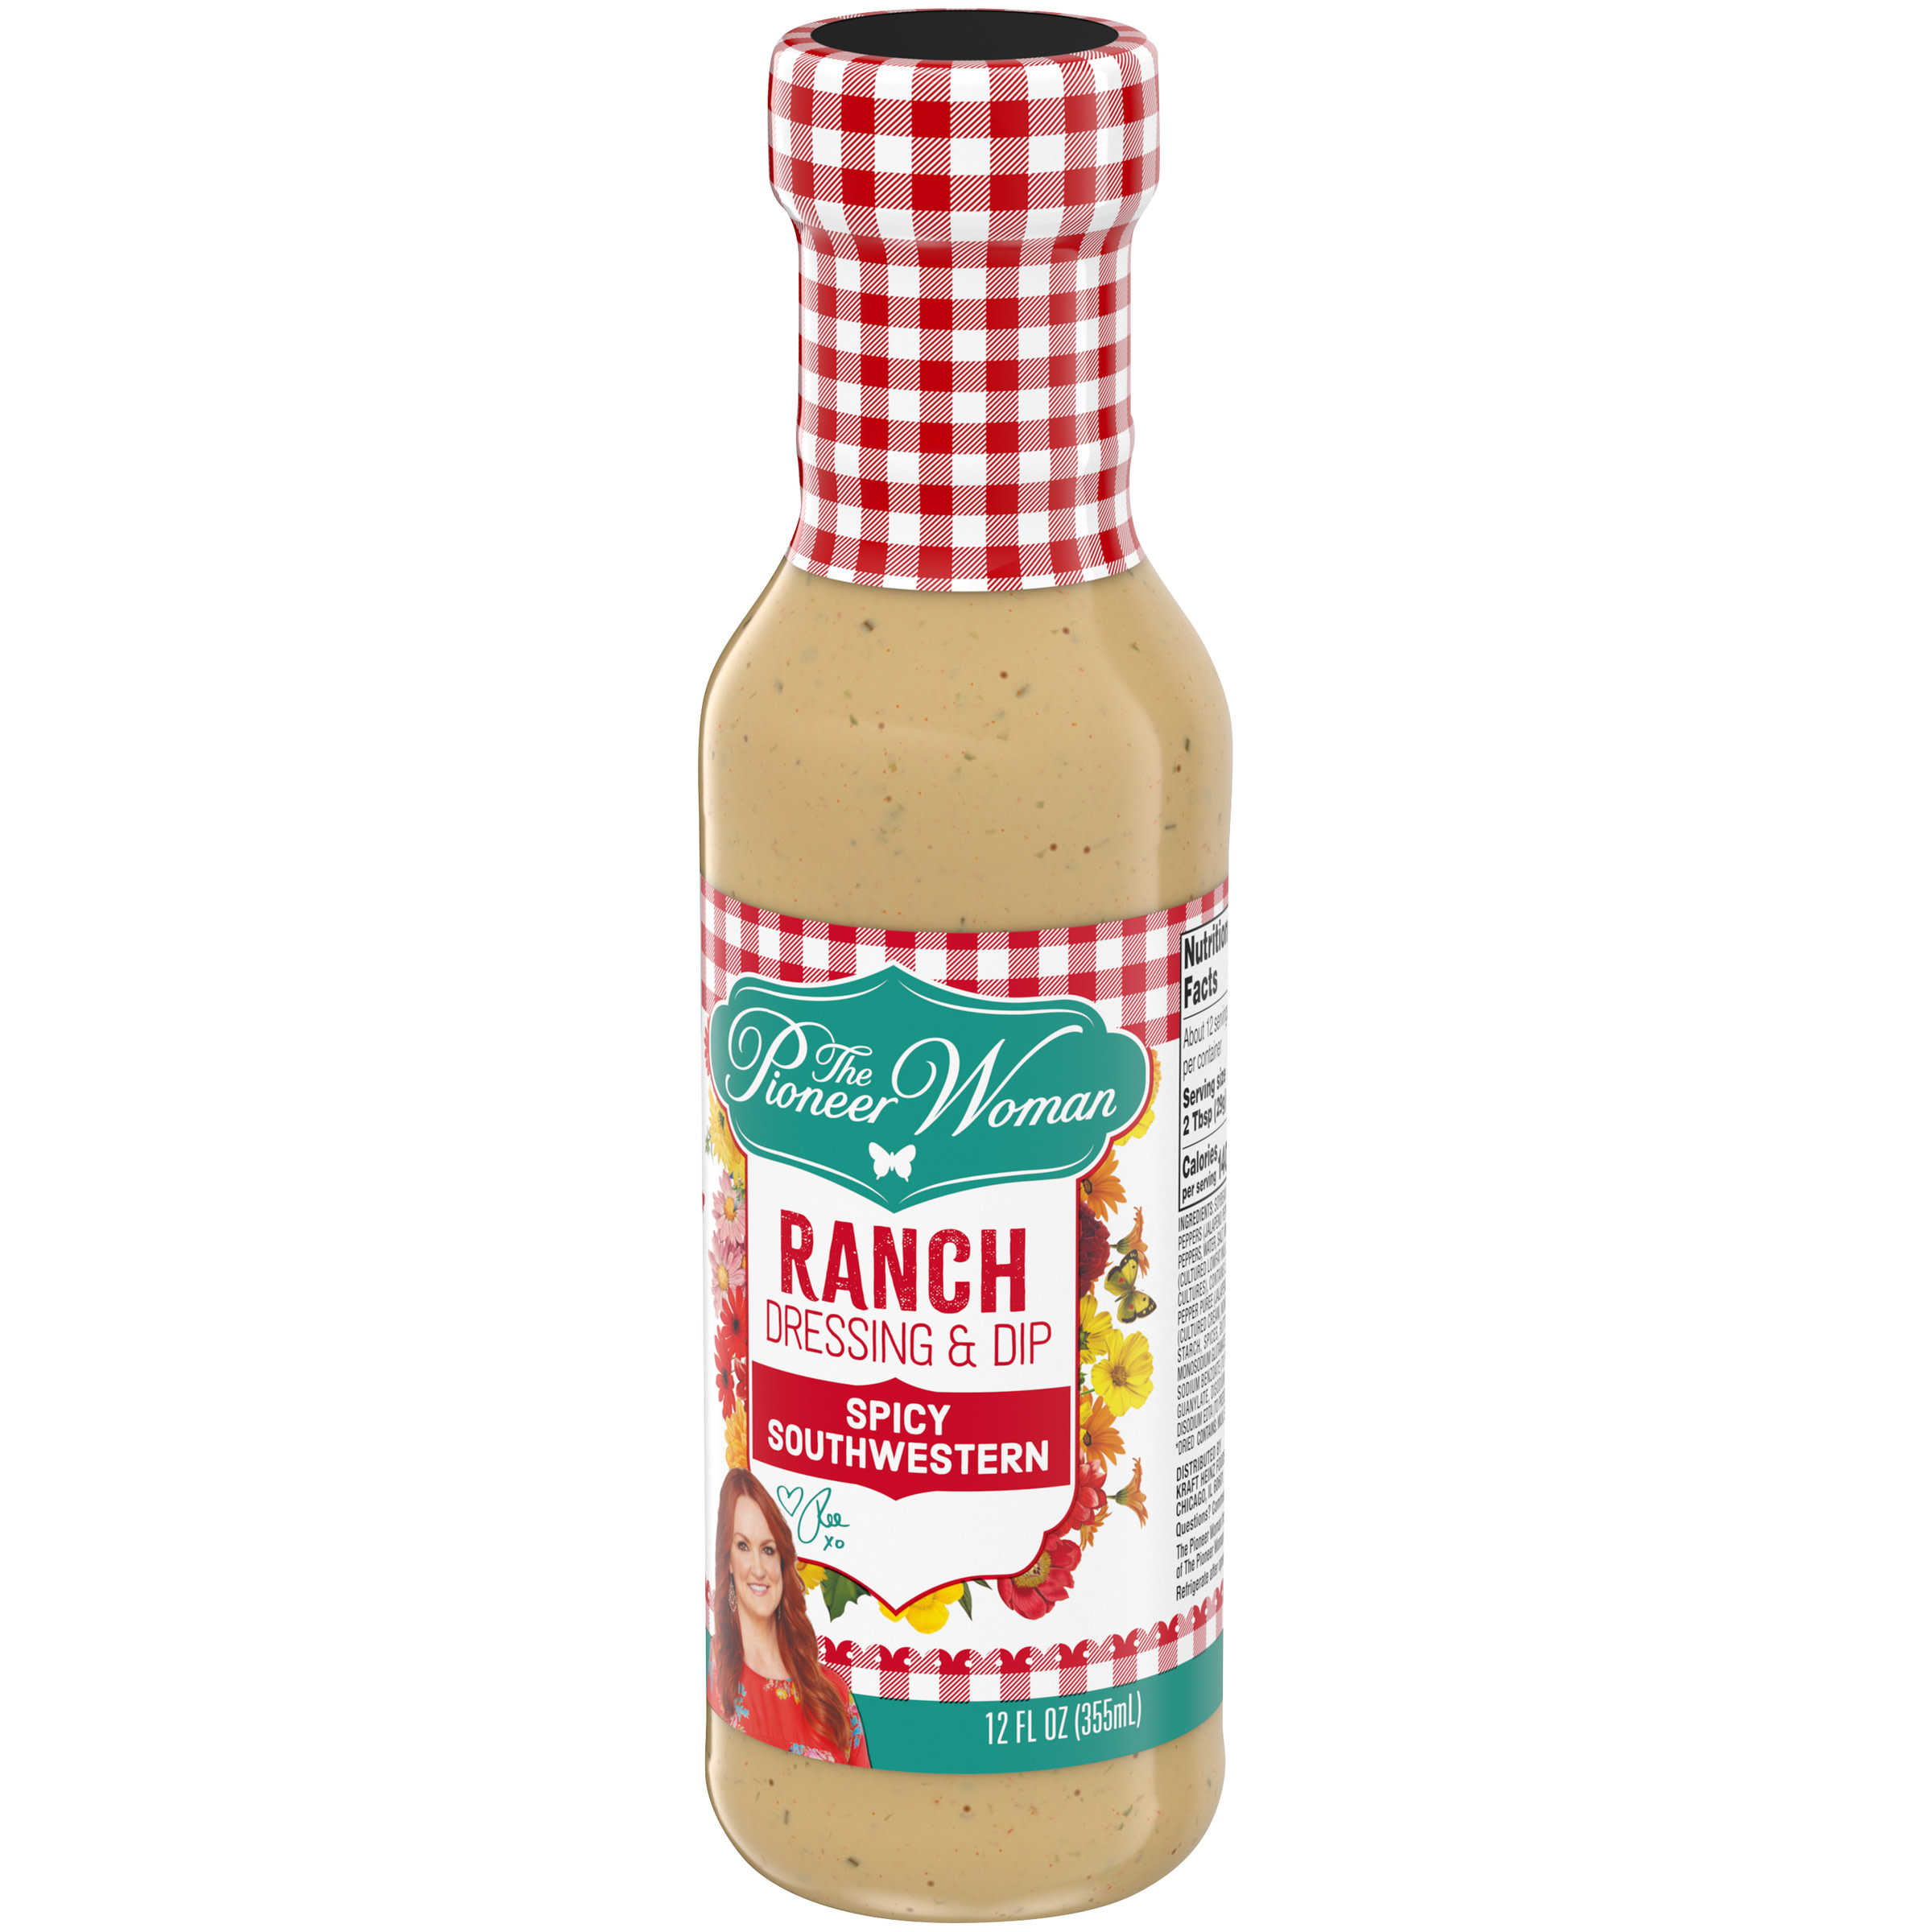 The Pioneer Woman Spicy Southwestern Ranch Salad Dressing & Dip, 12 fl oz Bottle - image 4 of 8